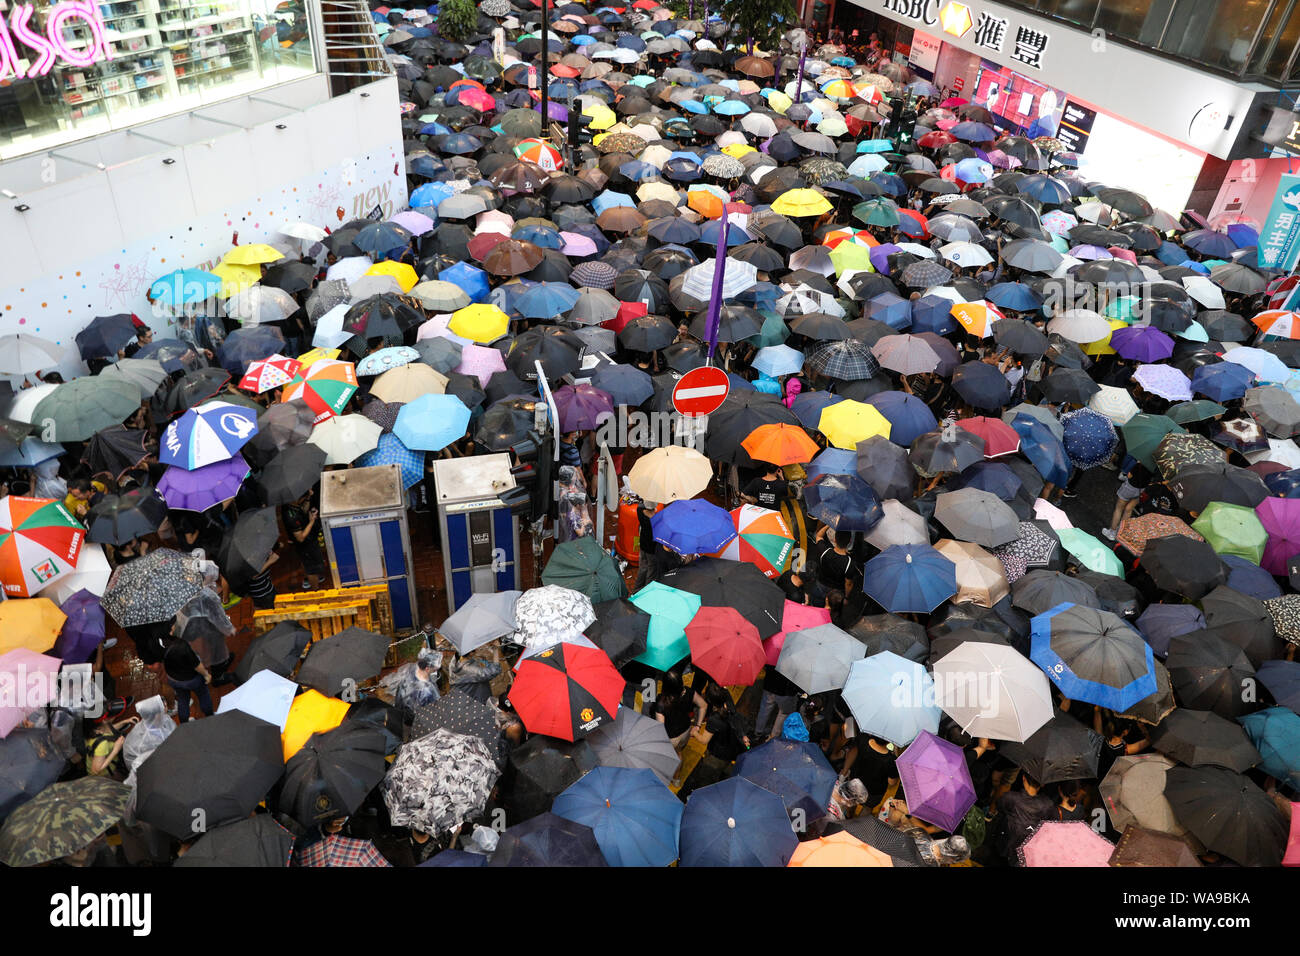 Hong Kong. 18th Aug, 2000. Huge number of protesters holding umbrellas on an unauthorized march during heavy rain marching through the streets of Causeway Bay which organizers claim more than 1.7 million people attended. 18th August 2019 Credit: David Coulson/Alamy Live News Stock Photo